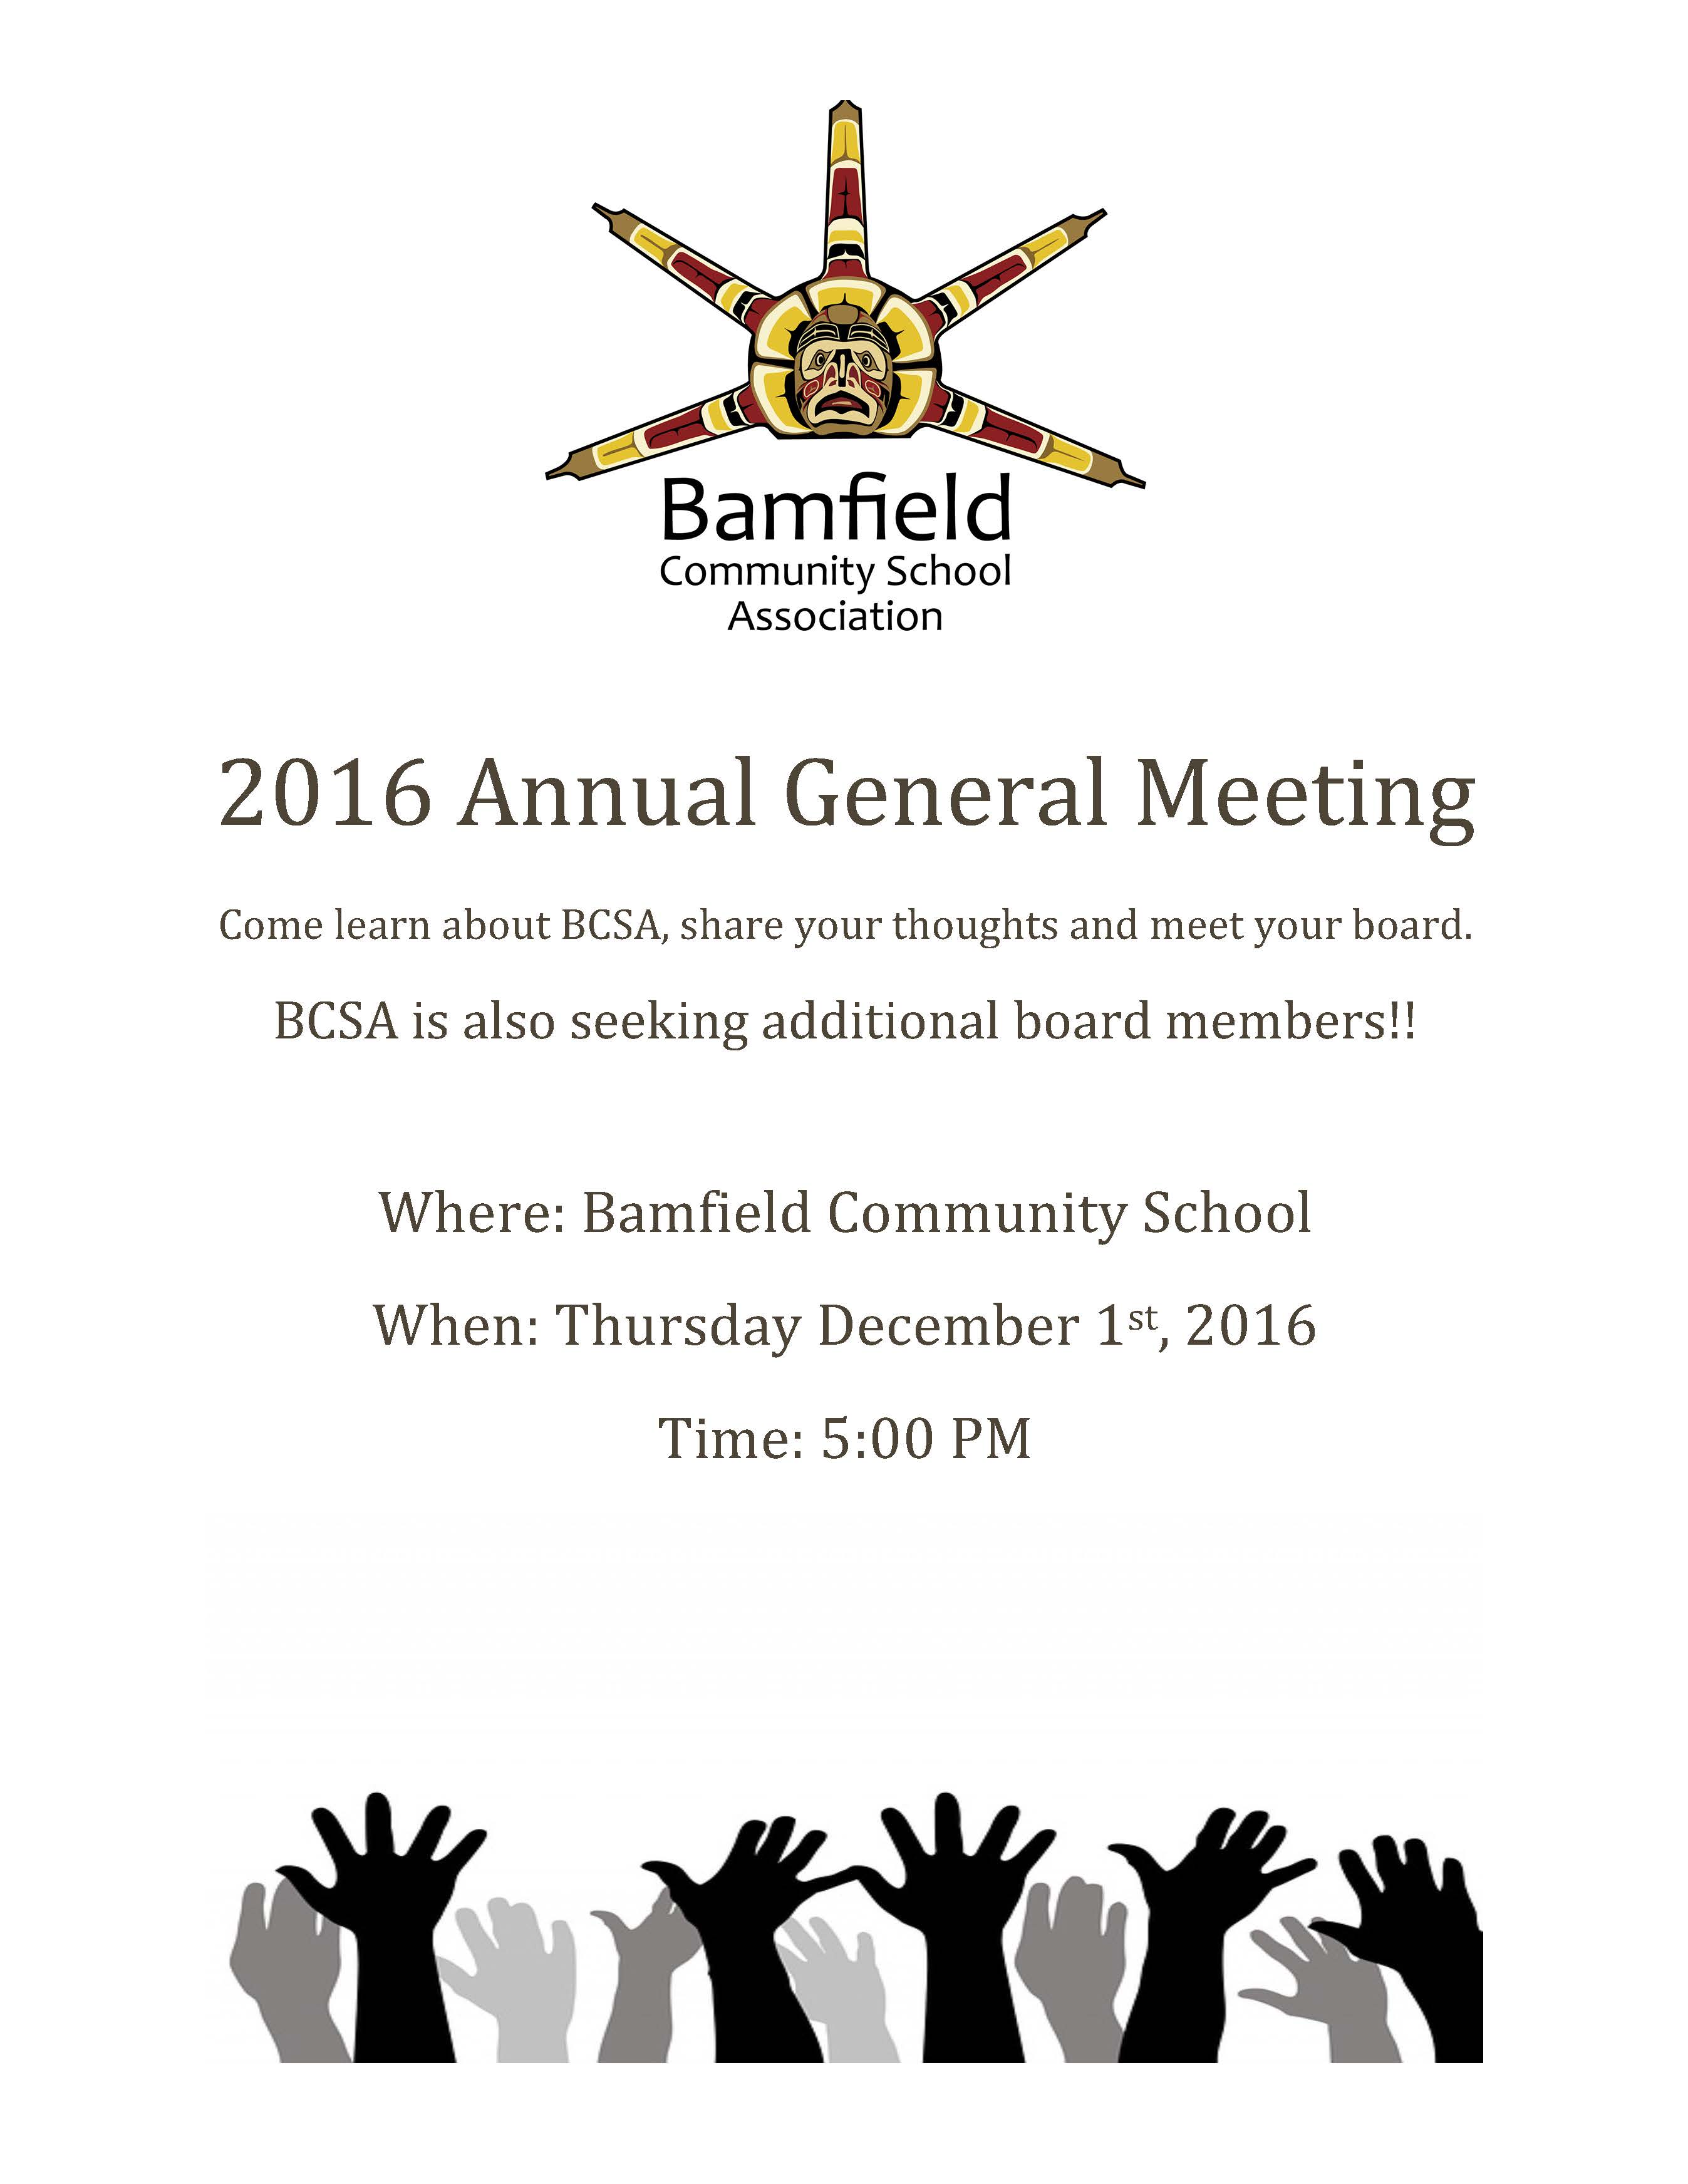 Please join us for the BCSA 2016 AGM!